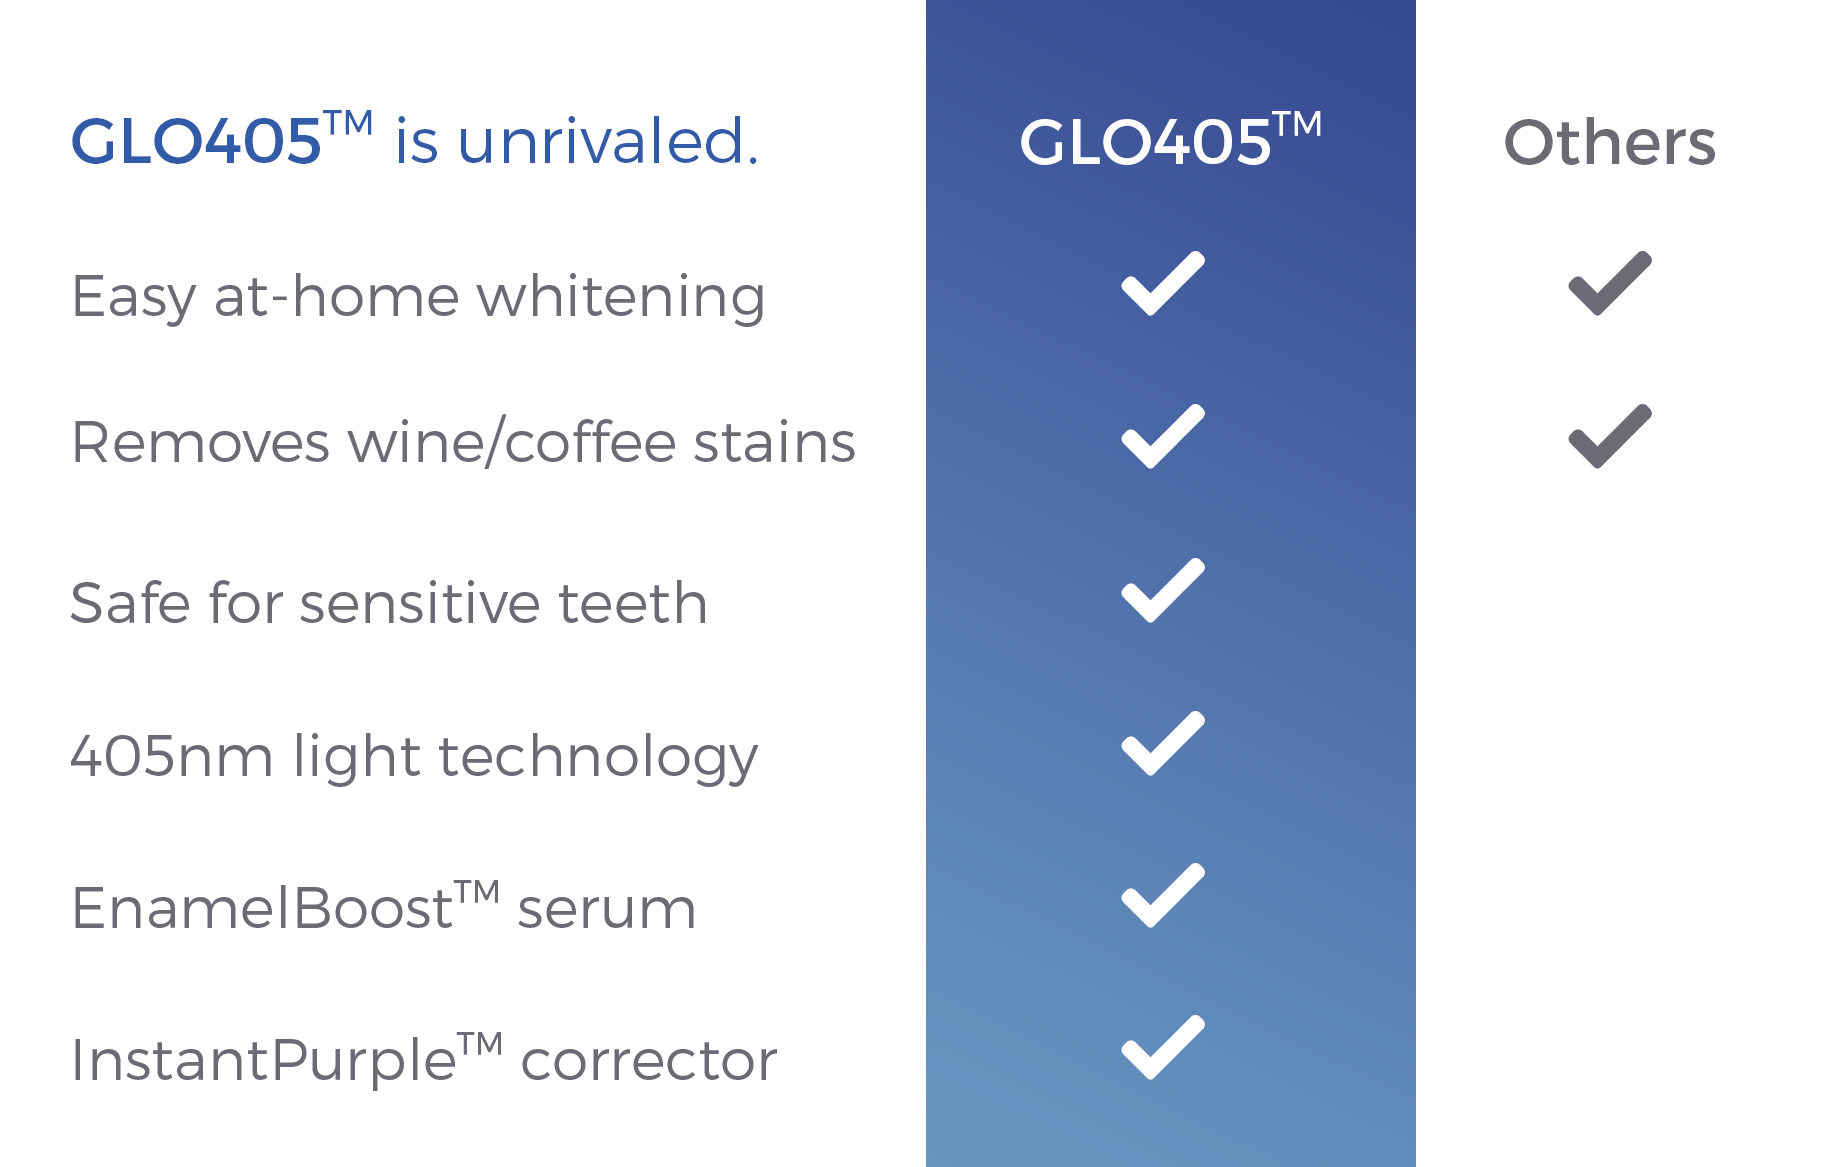 GLO405 Teeth Whitening Kit Compared to Competitors